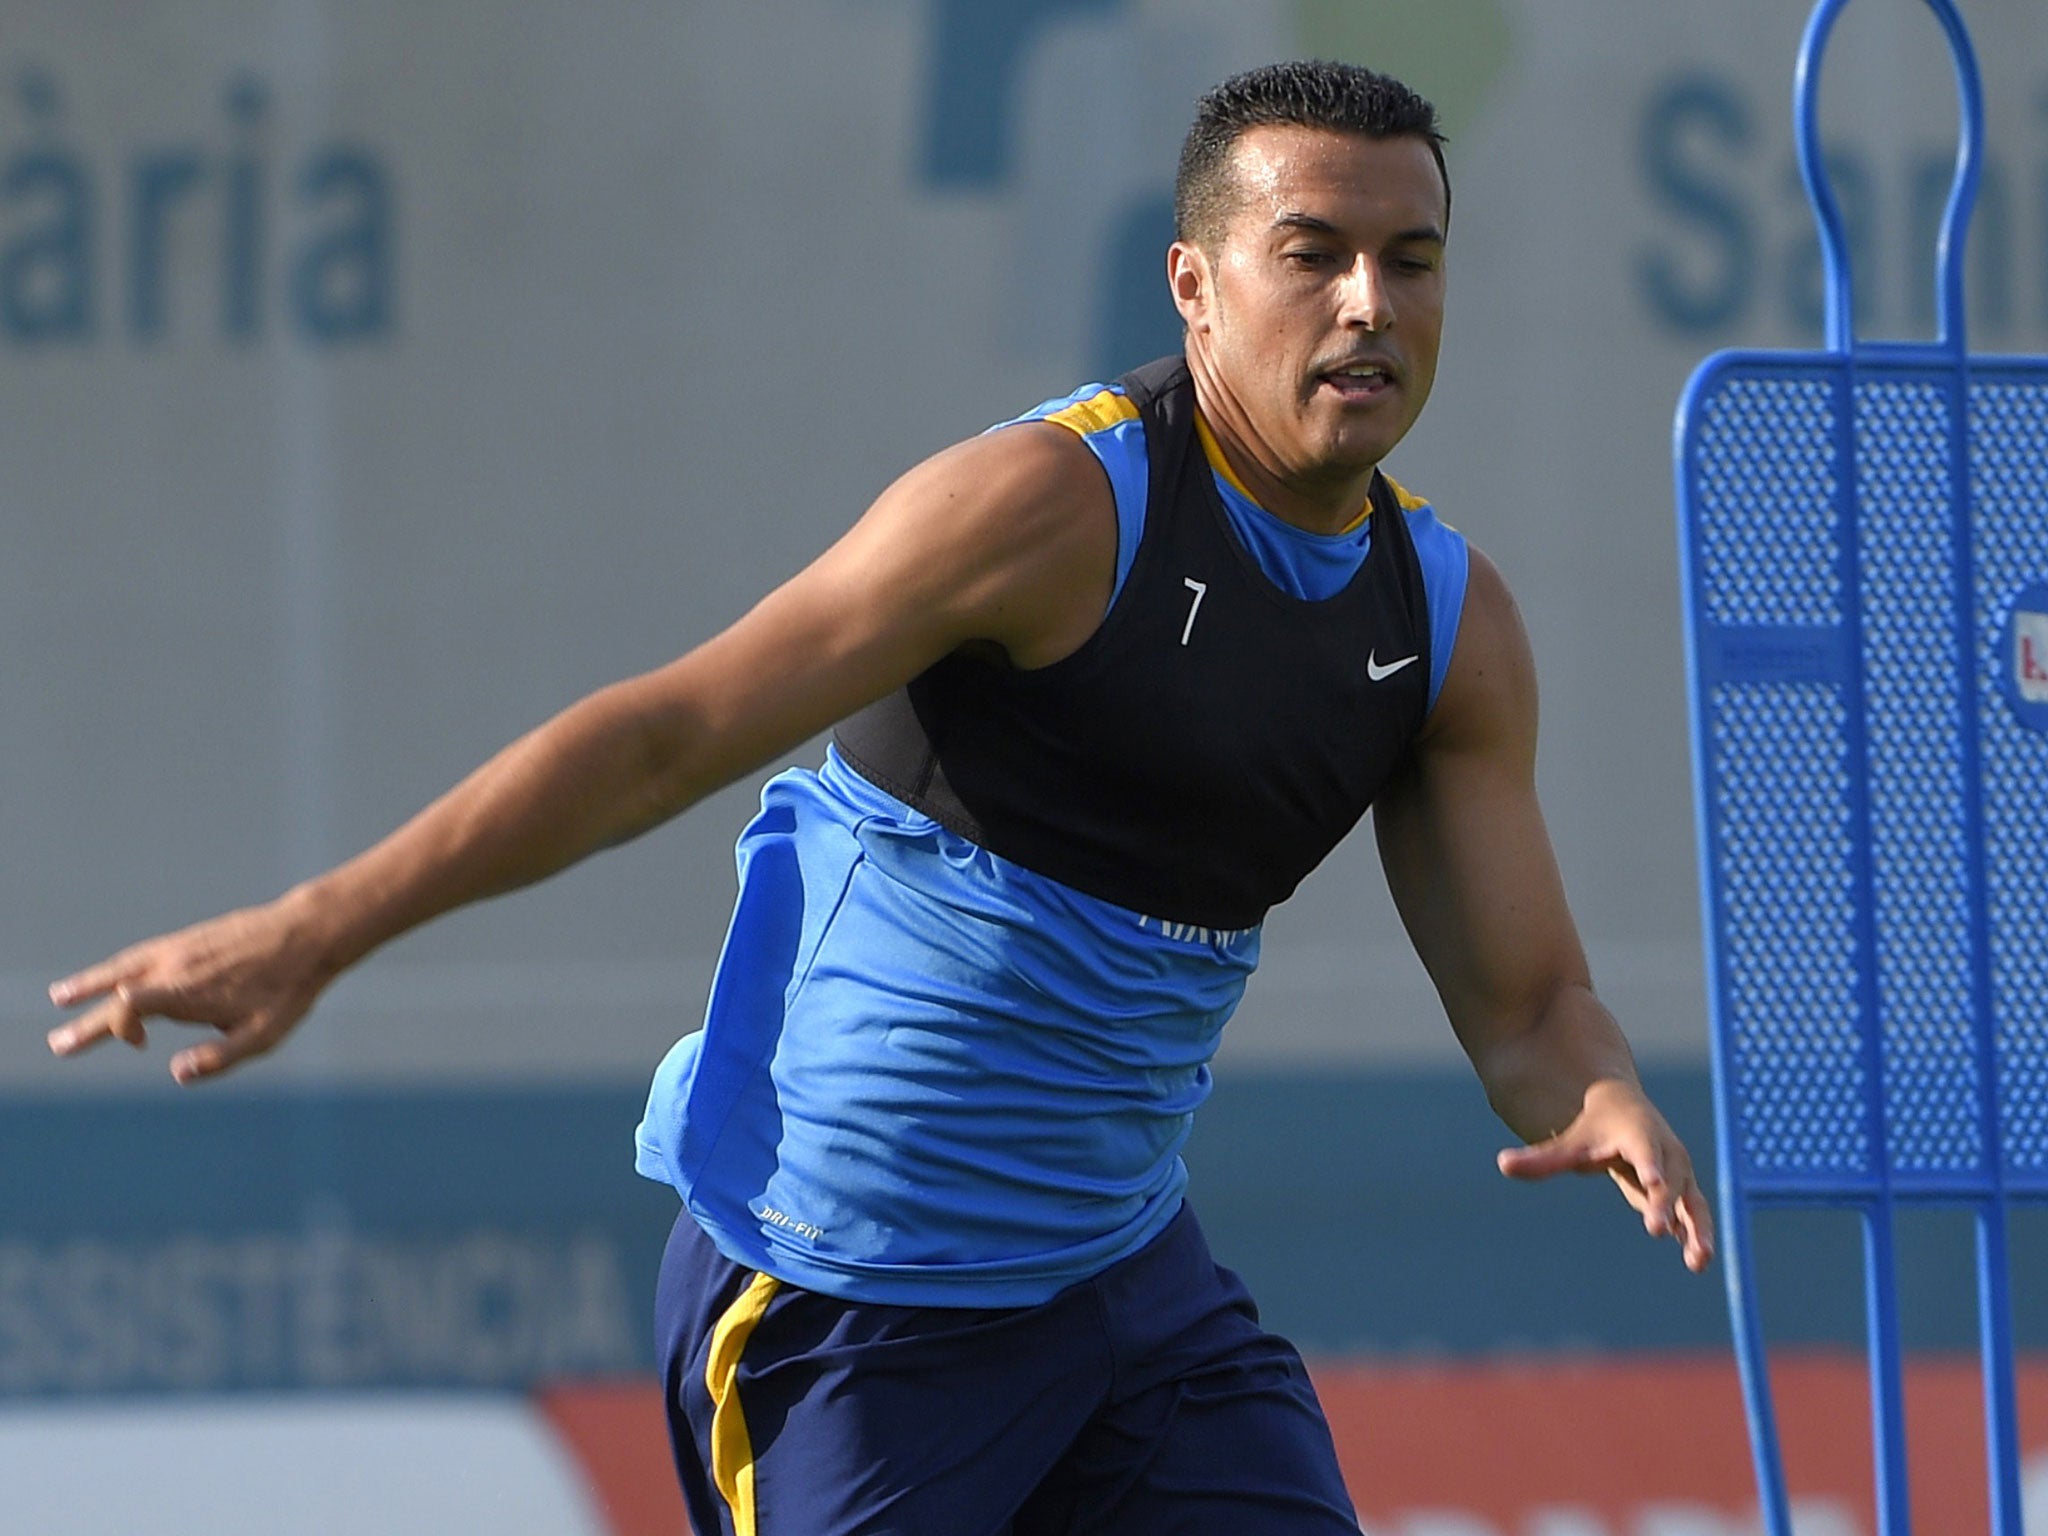 Pedro pictured in Barcelona training